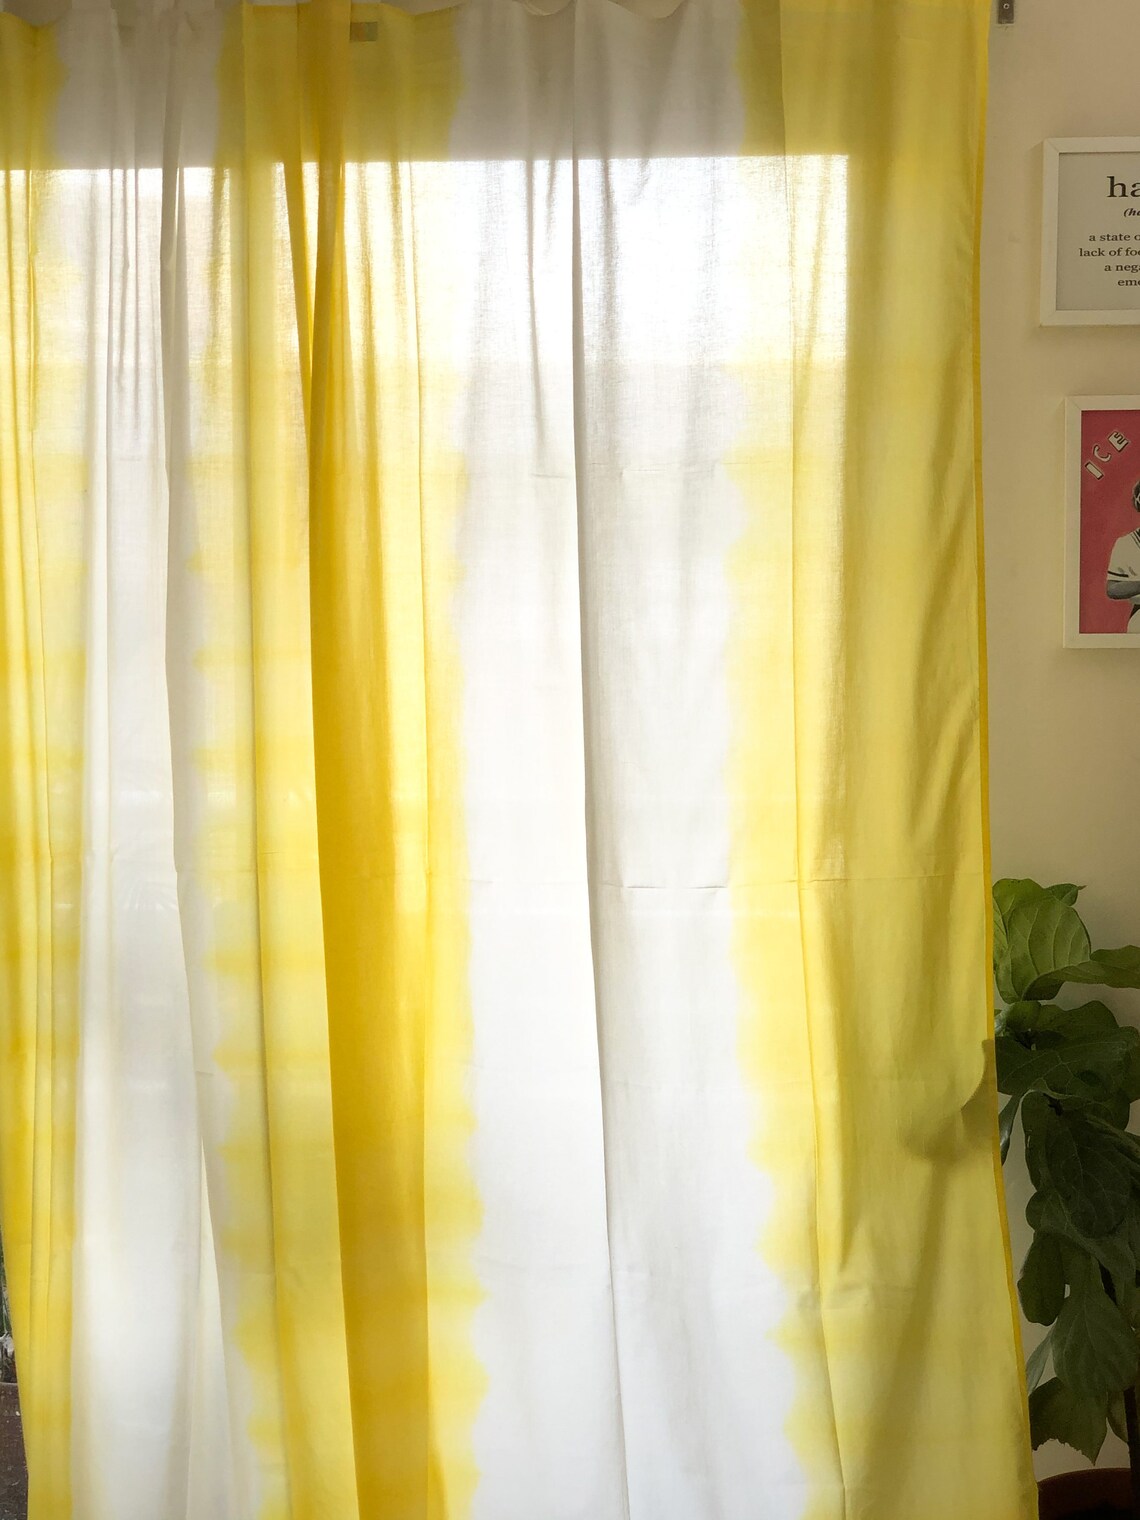 Yellow Ombre Semi Sheer Curtainsdip Dye Curtains Tie Dye | Etsy